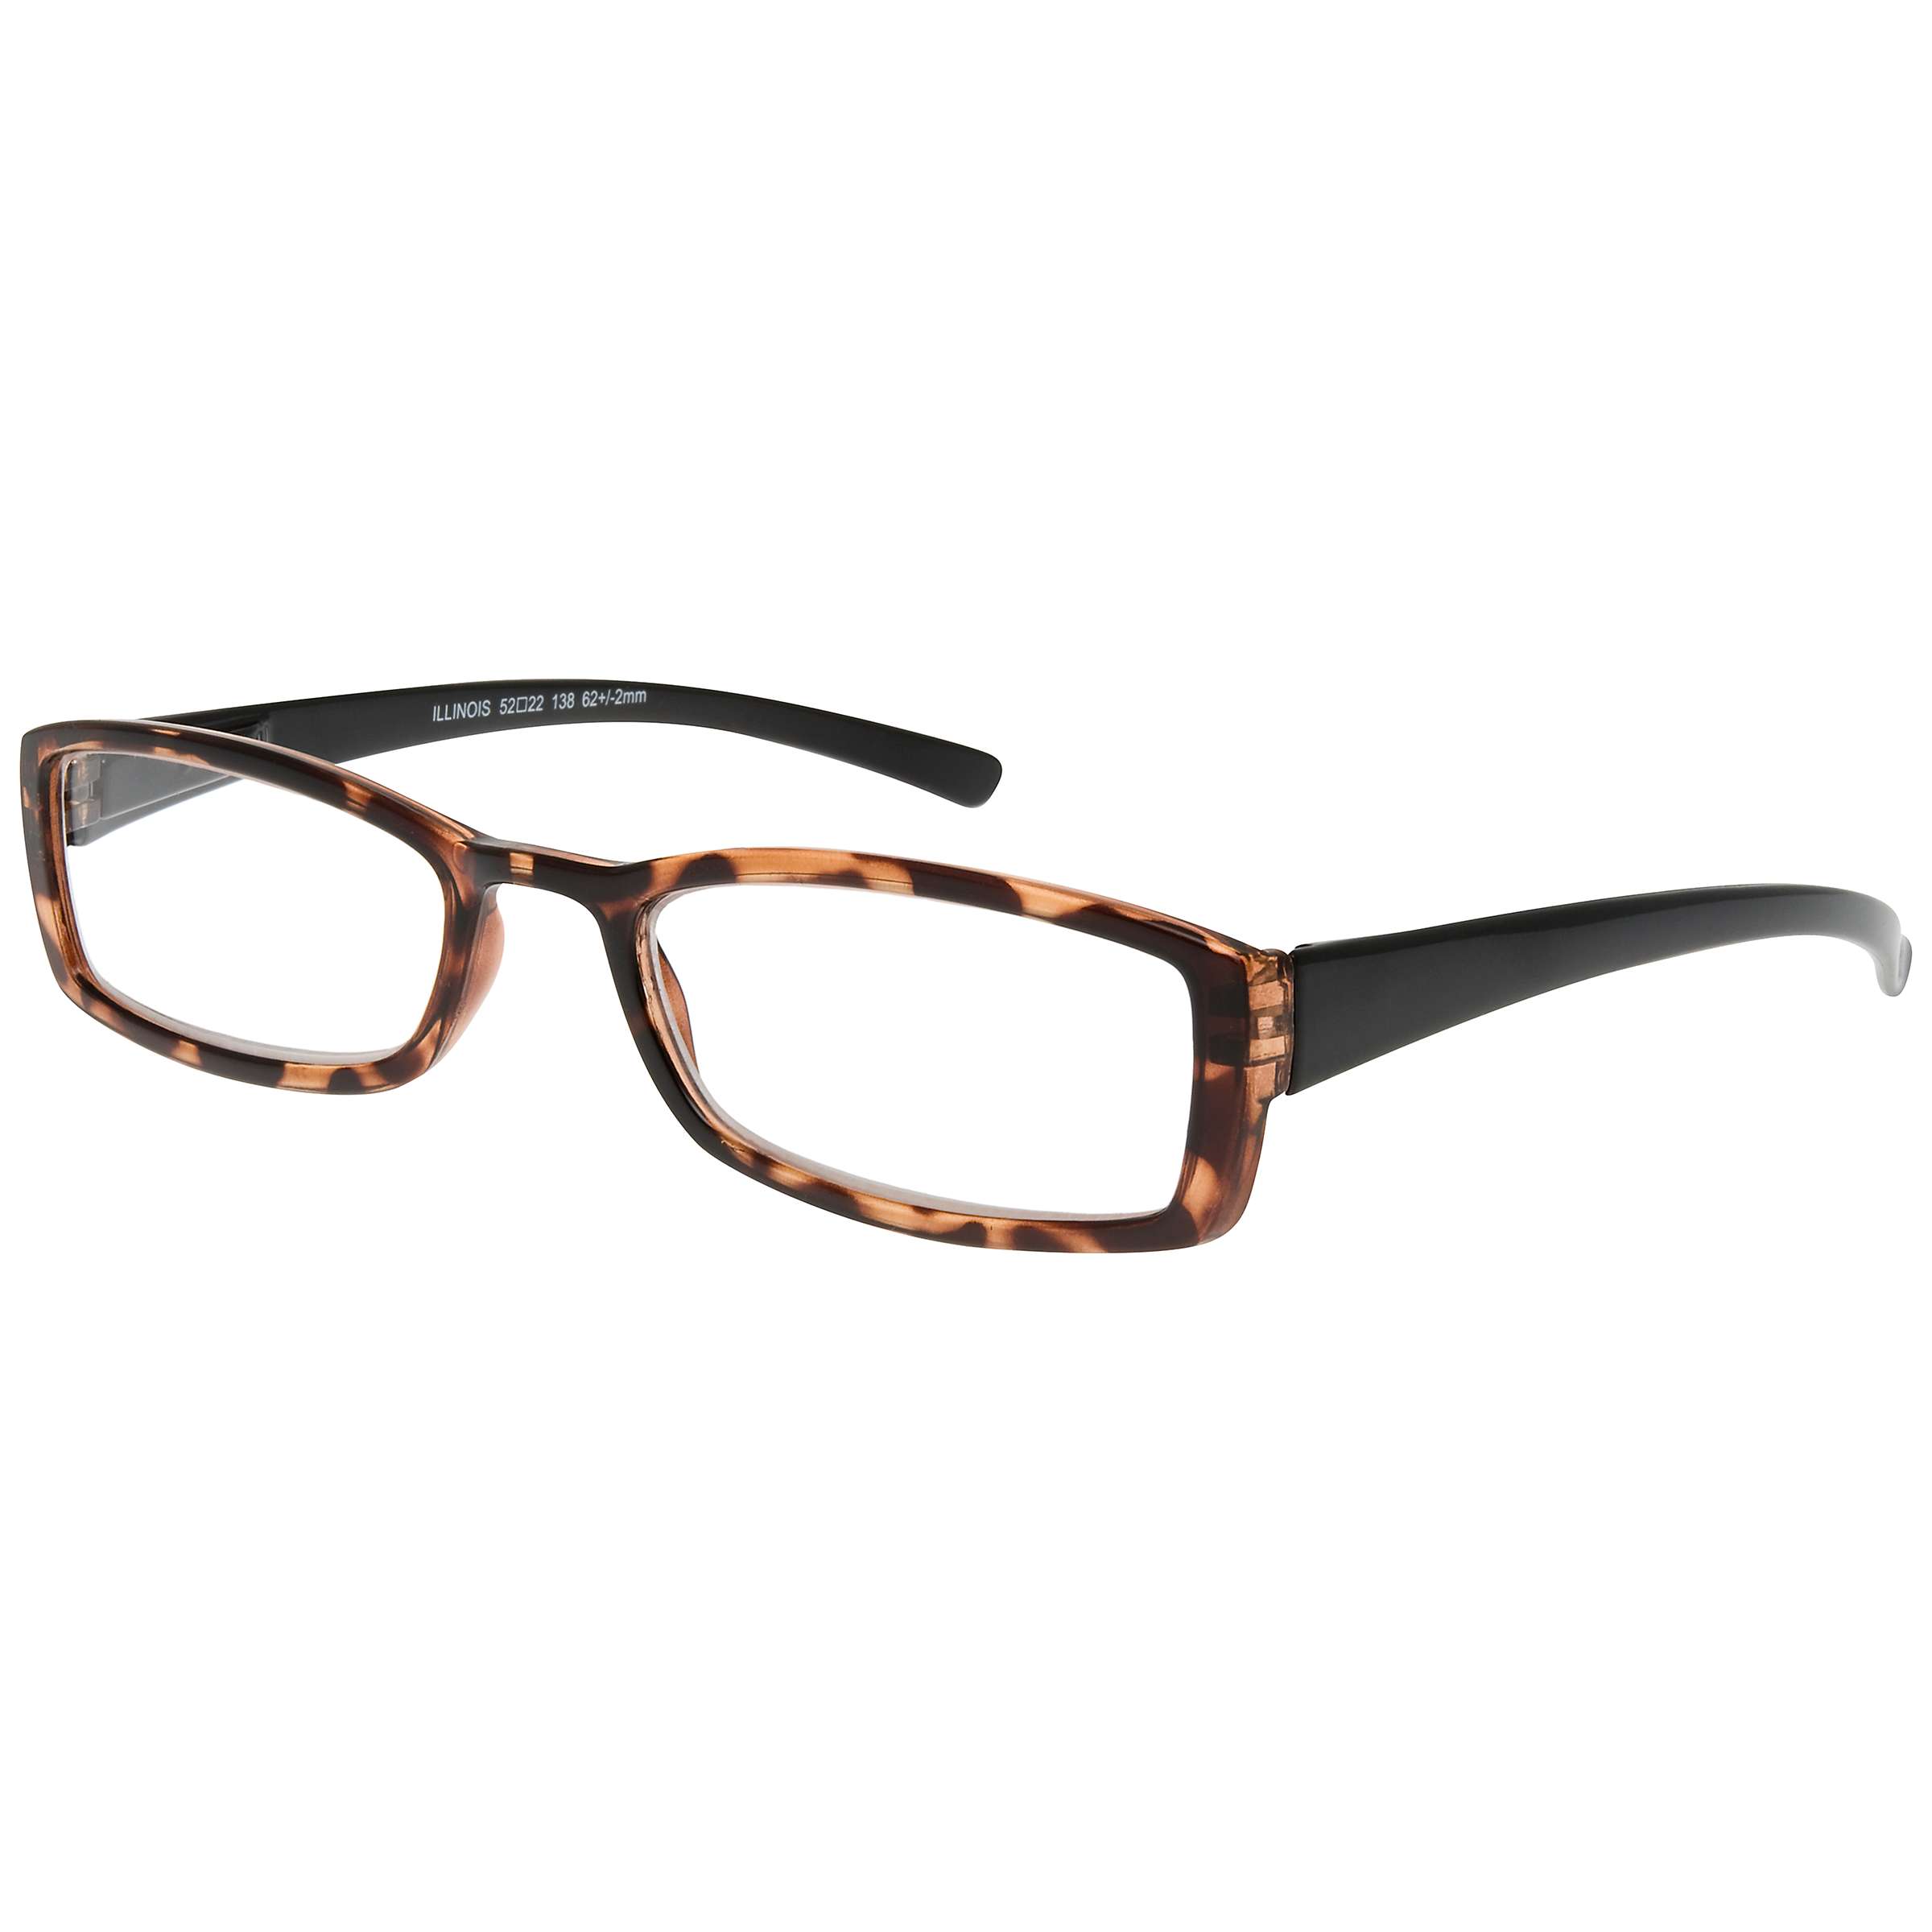 Buy Magnif Eyes Unisex Narrow Fit Ready Readers Illinois Glasses, Shell Online at johnlewis.com